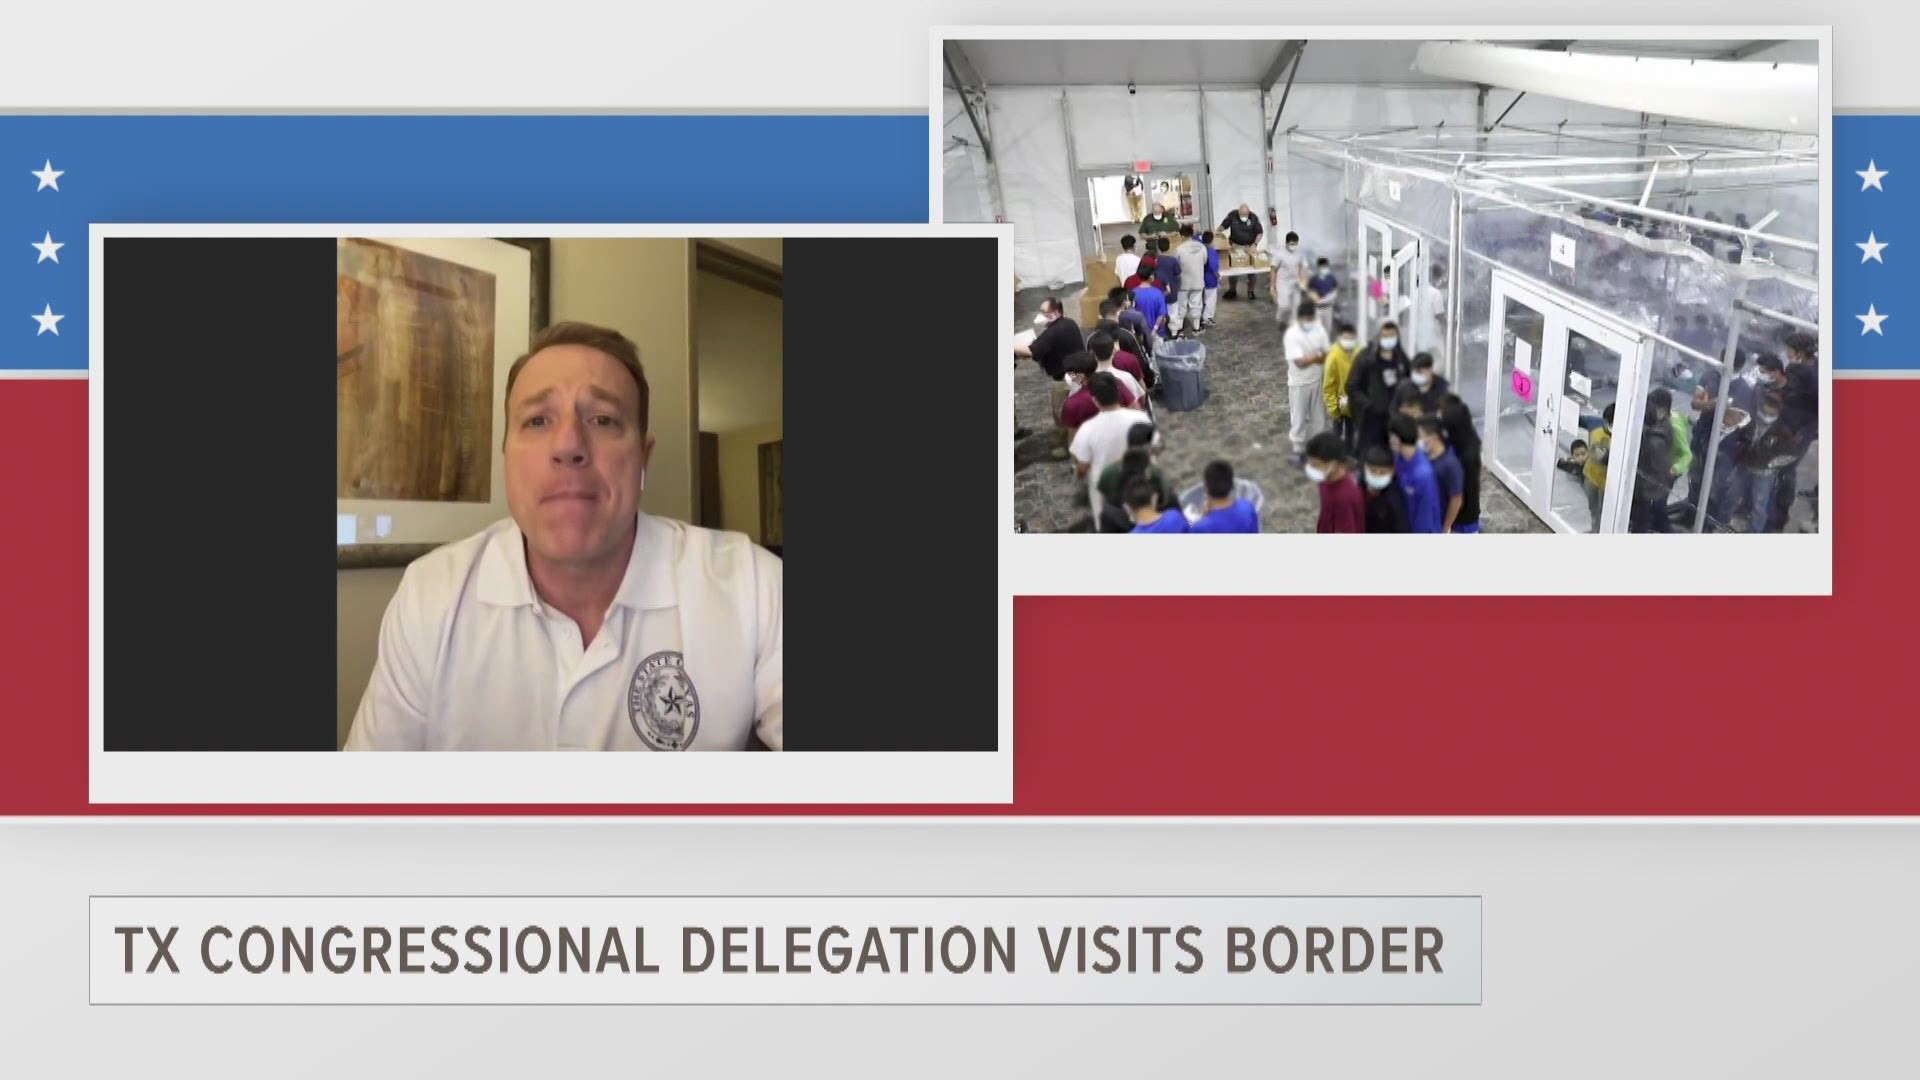 Congressman Pat Fallon (R-Texas) explains what he would tell Pres. Biden about the state of immigration after touring border detention facilities in South Texas